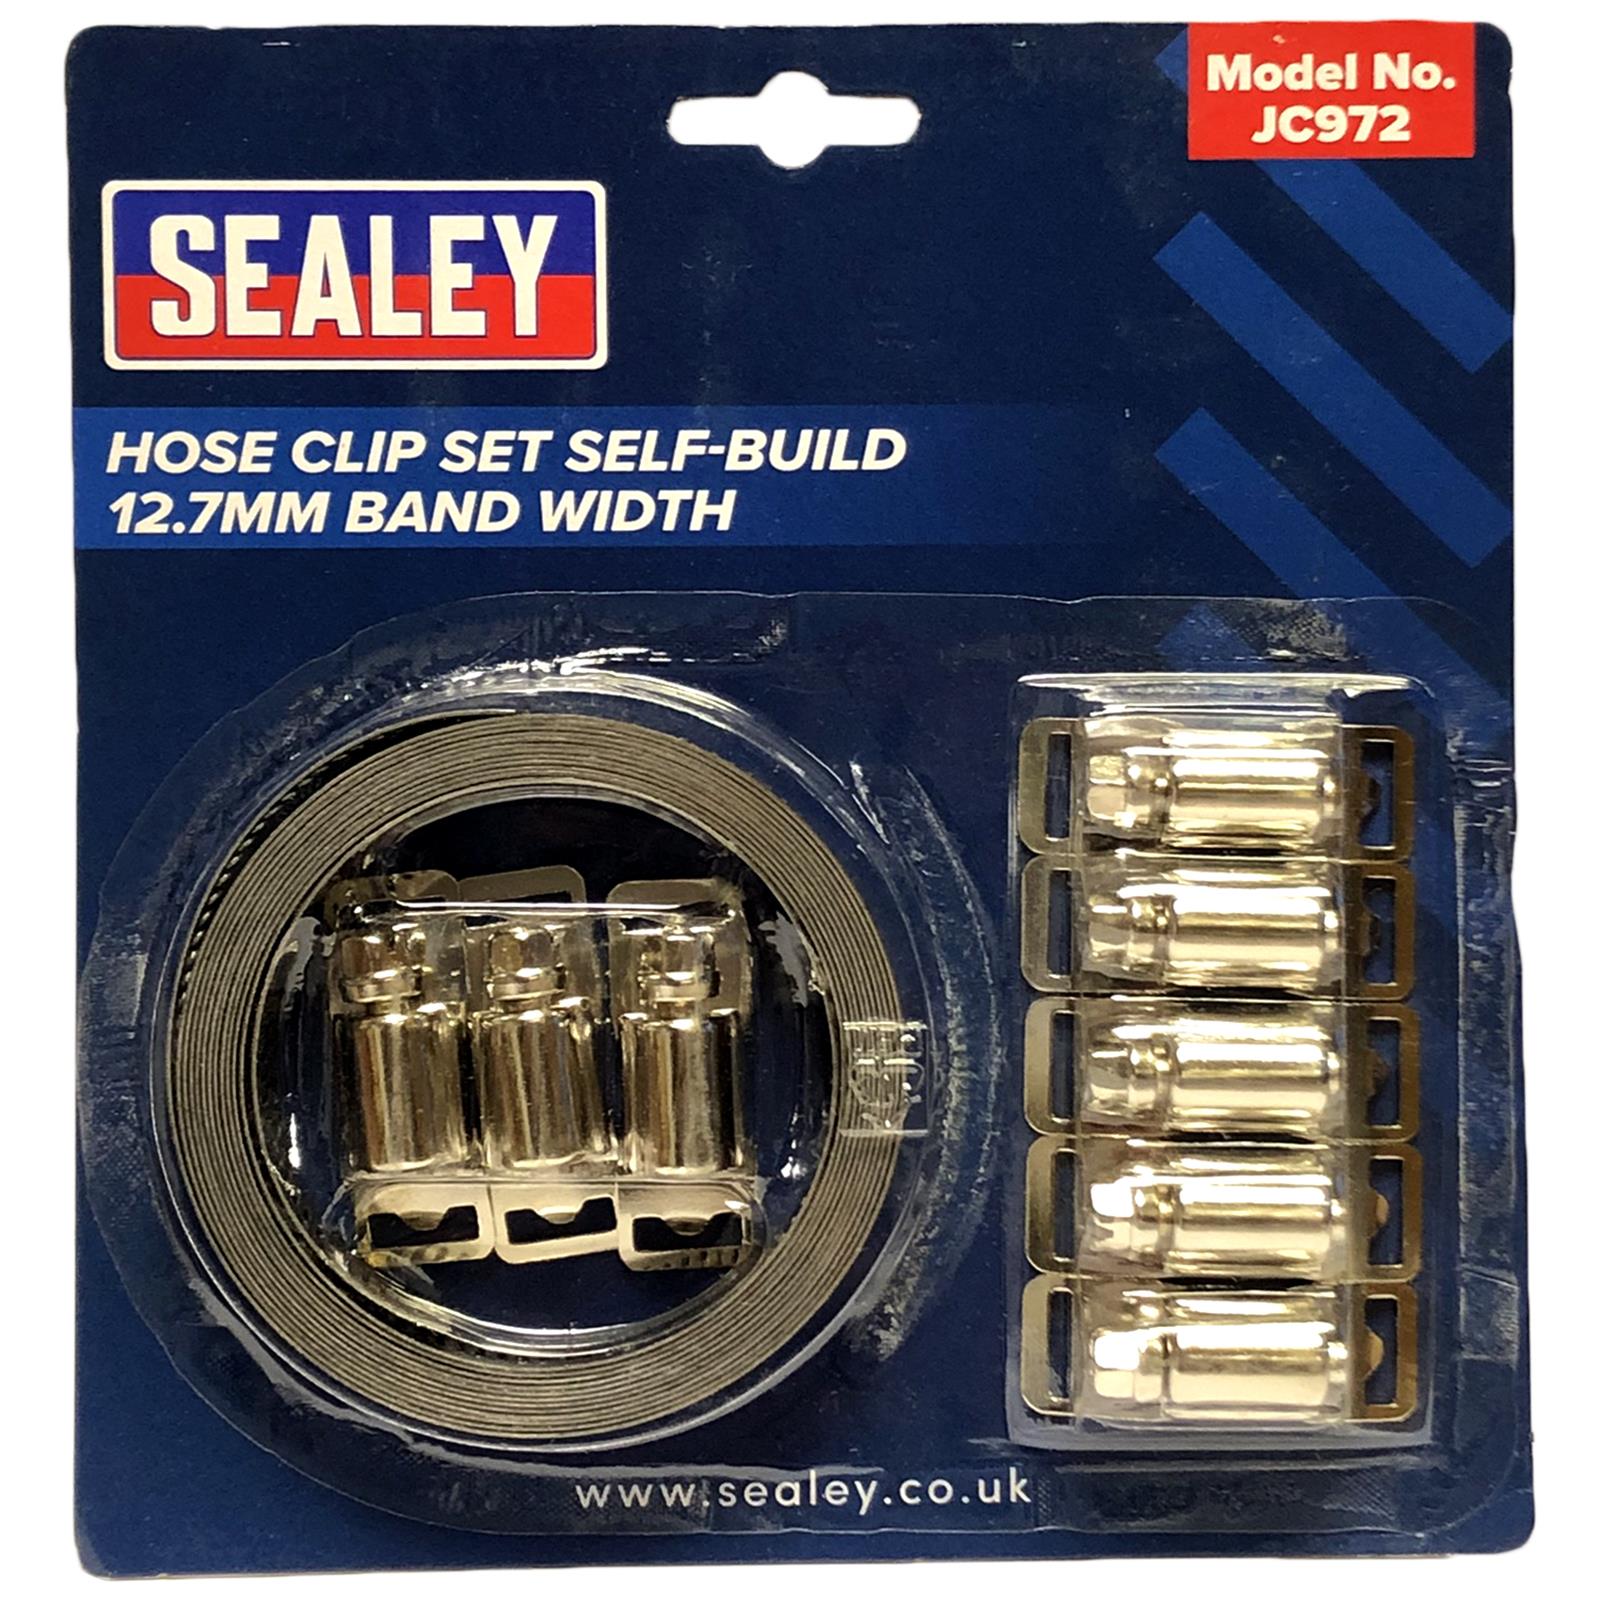 Sealey Hose Clamp Set Self Build 12.7mm Band Width with 8 Tension Clamps